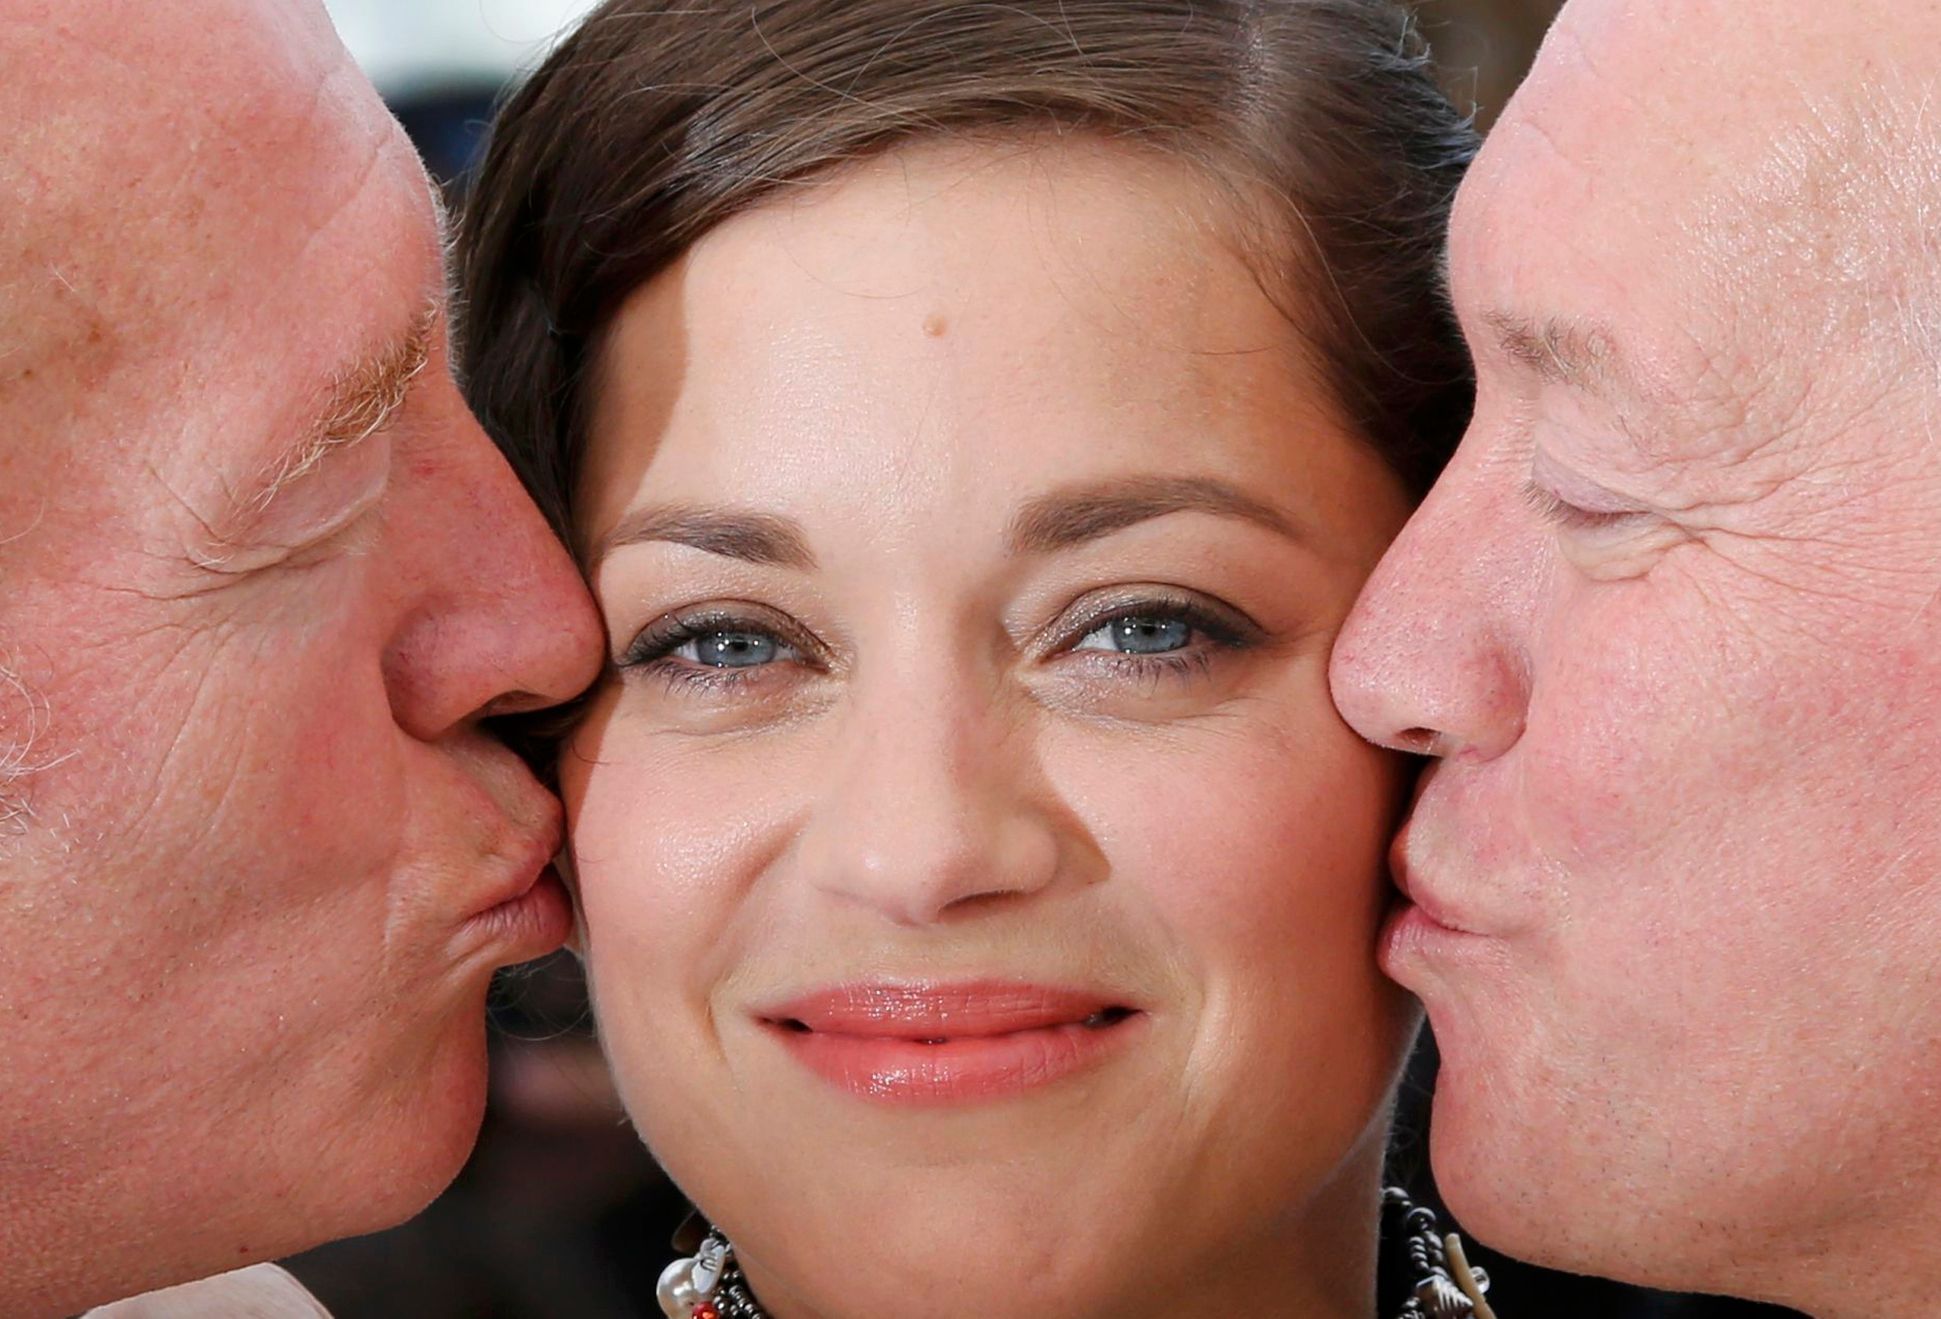 Directors Jean-Pierre and Luc Dardenne kiss cast member Marion Cotillard as they pose during a photocall for the film &quot;Deux jours, une nuit&quot; in competition at the 67th Cannes Film Festival i